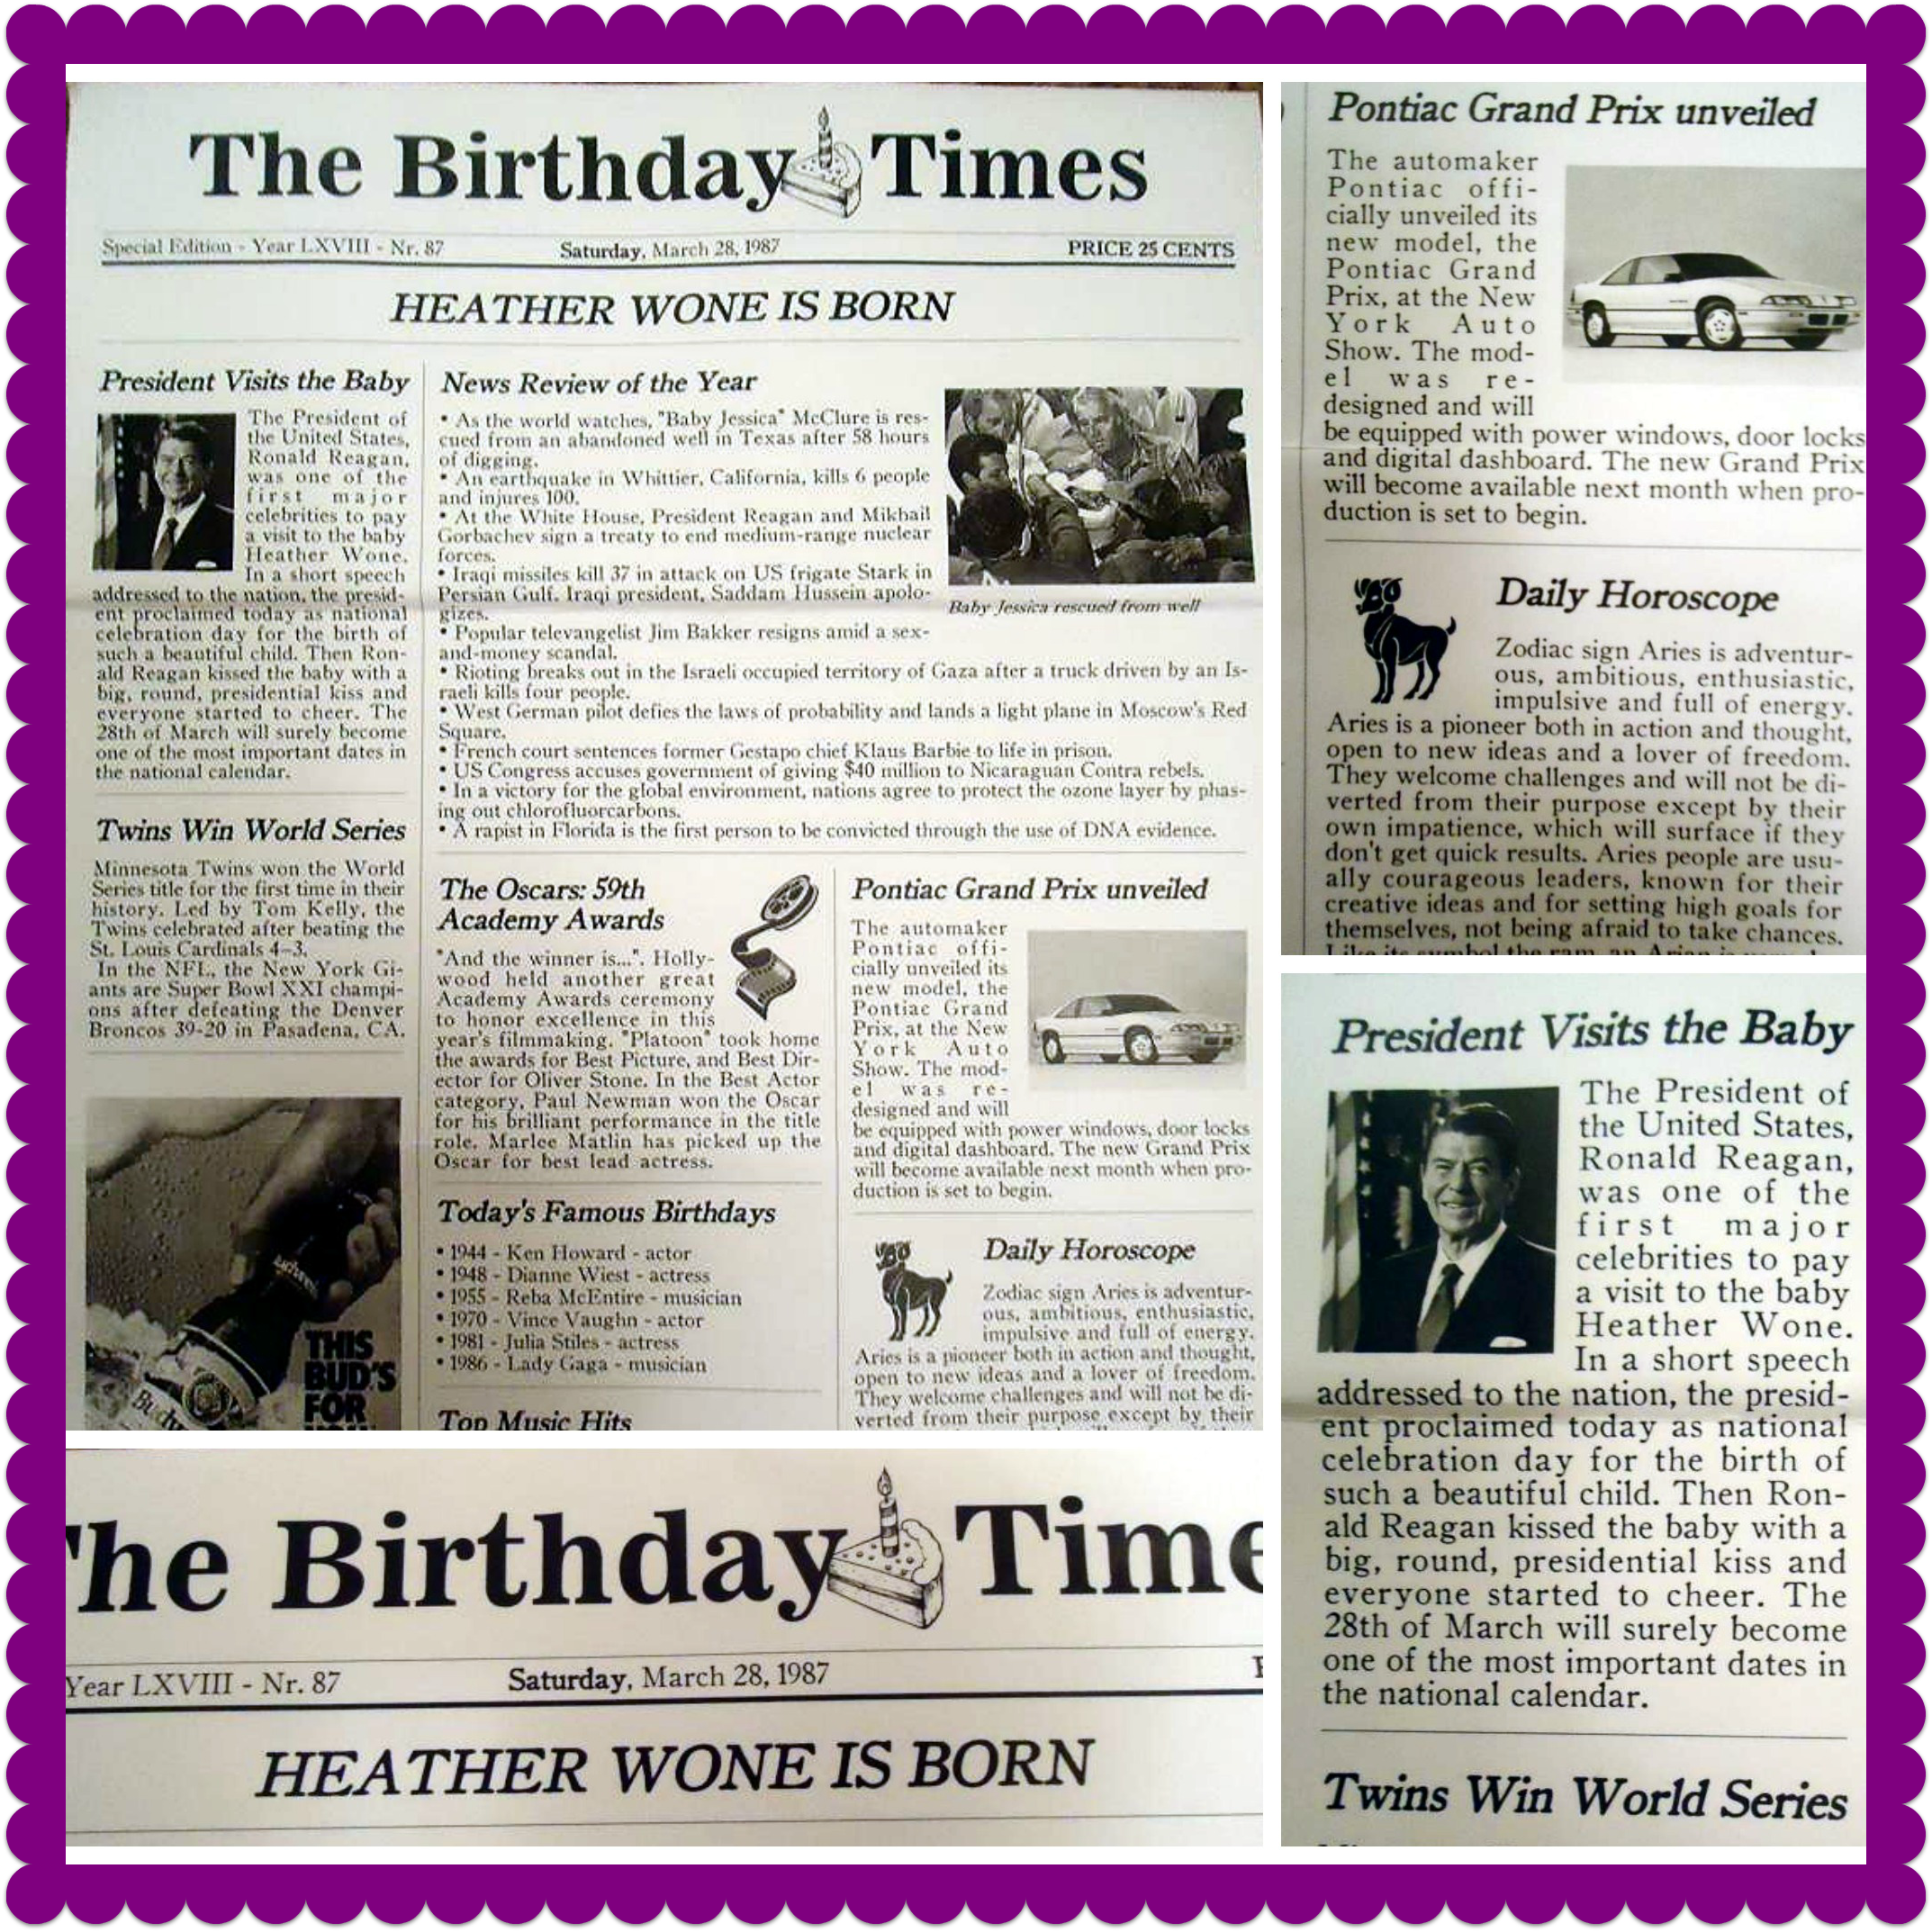 http://missfrugalmommy.com/wp-content/uploads/2013/07/birthday-times-2.png